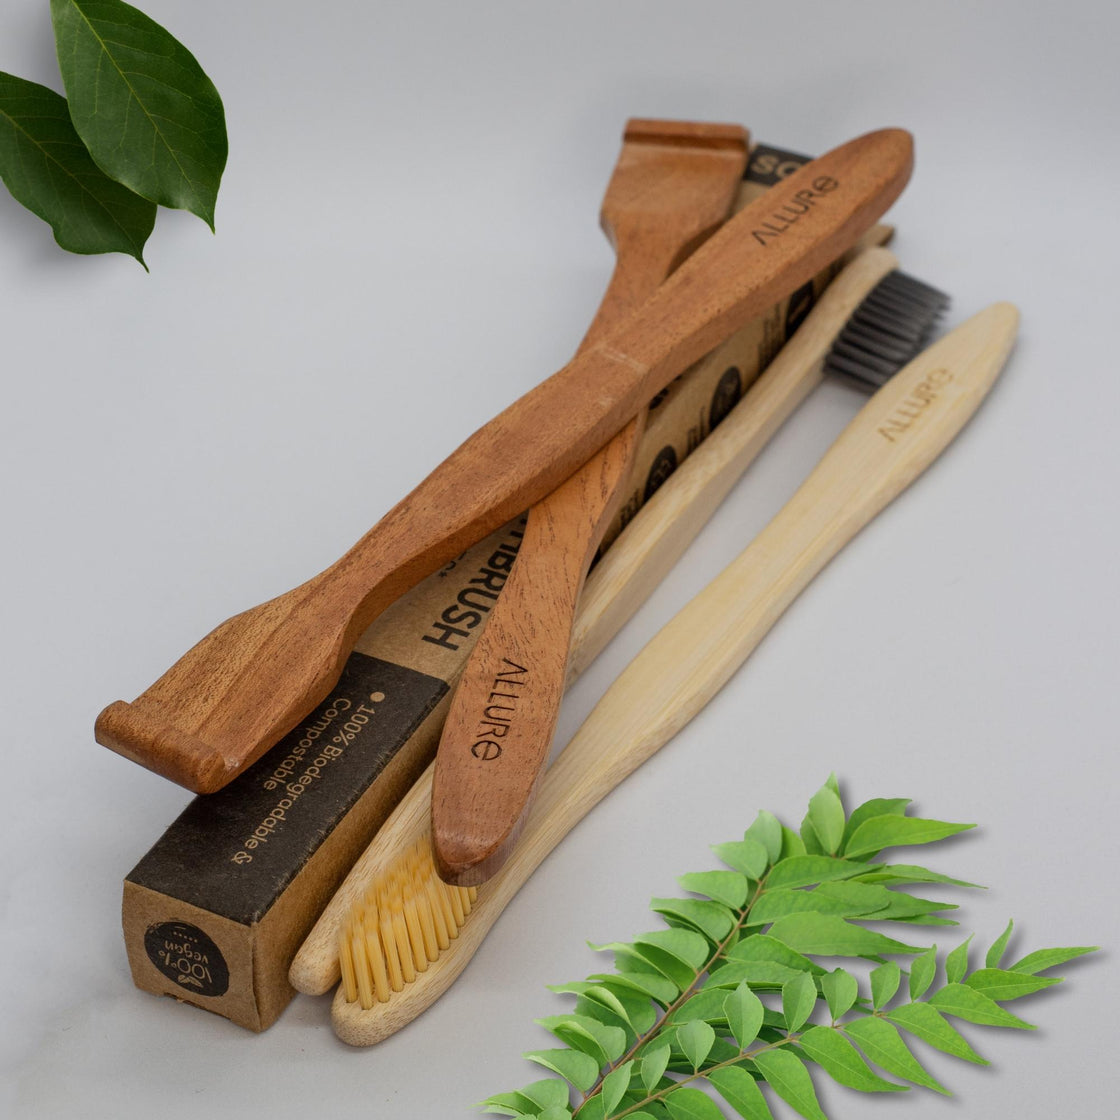 Allure Pack of 4 Bamboo Toothbrush and Wooden Tounge Cleaner (OT-01+02+OTC)